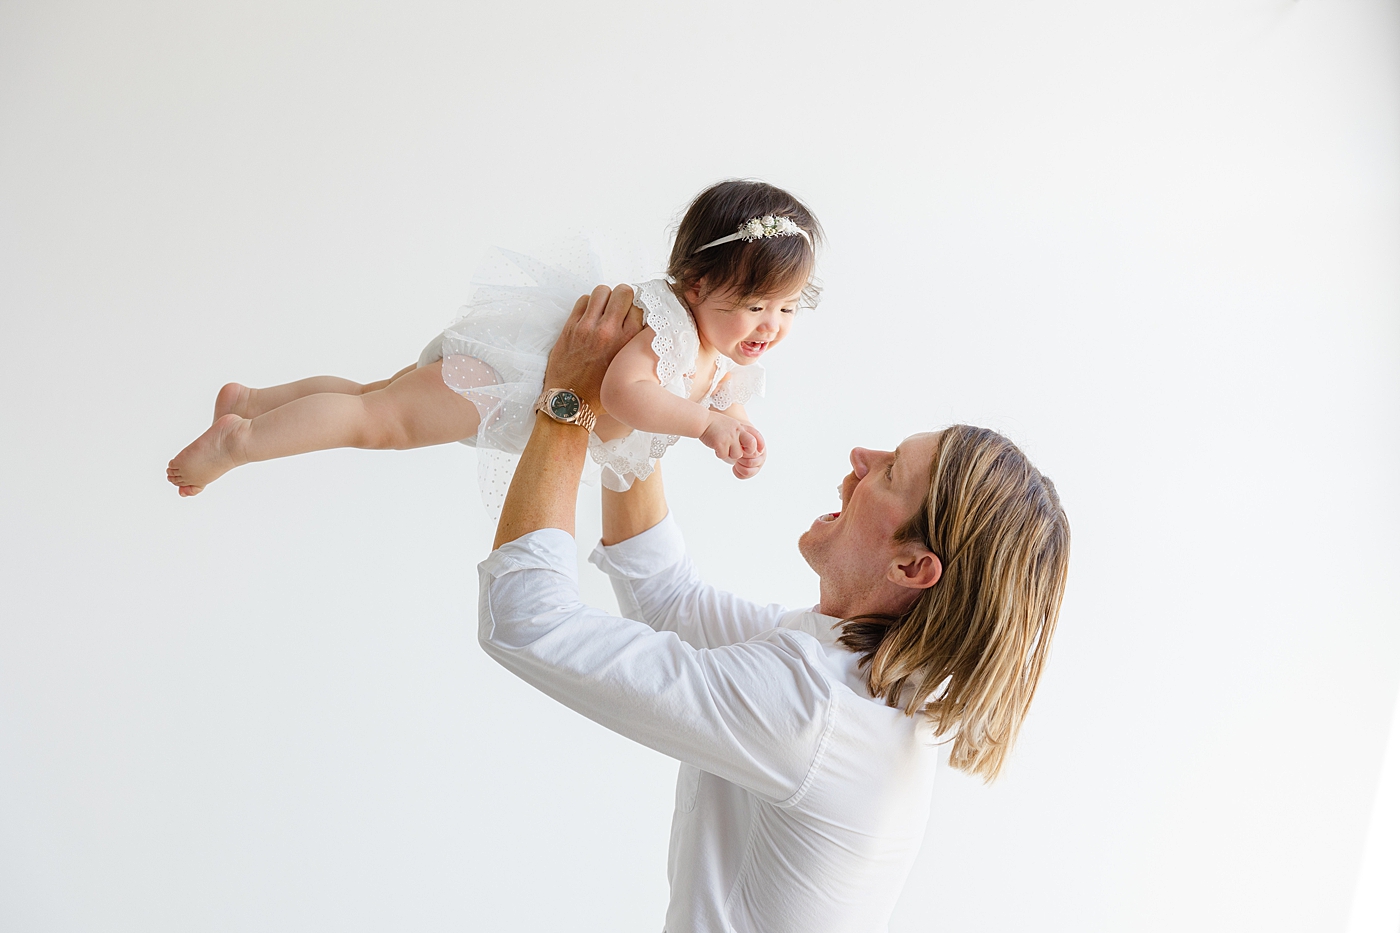 Dad playing with his baby girl during her one year studio milestone session| Image by Sana Ahmed Photography